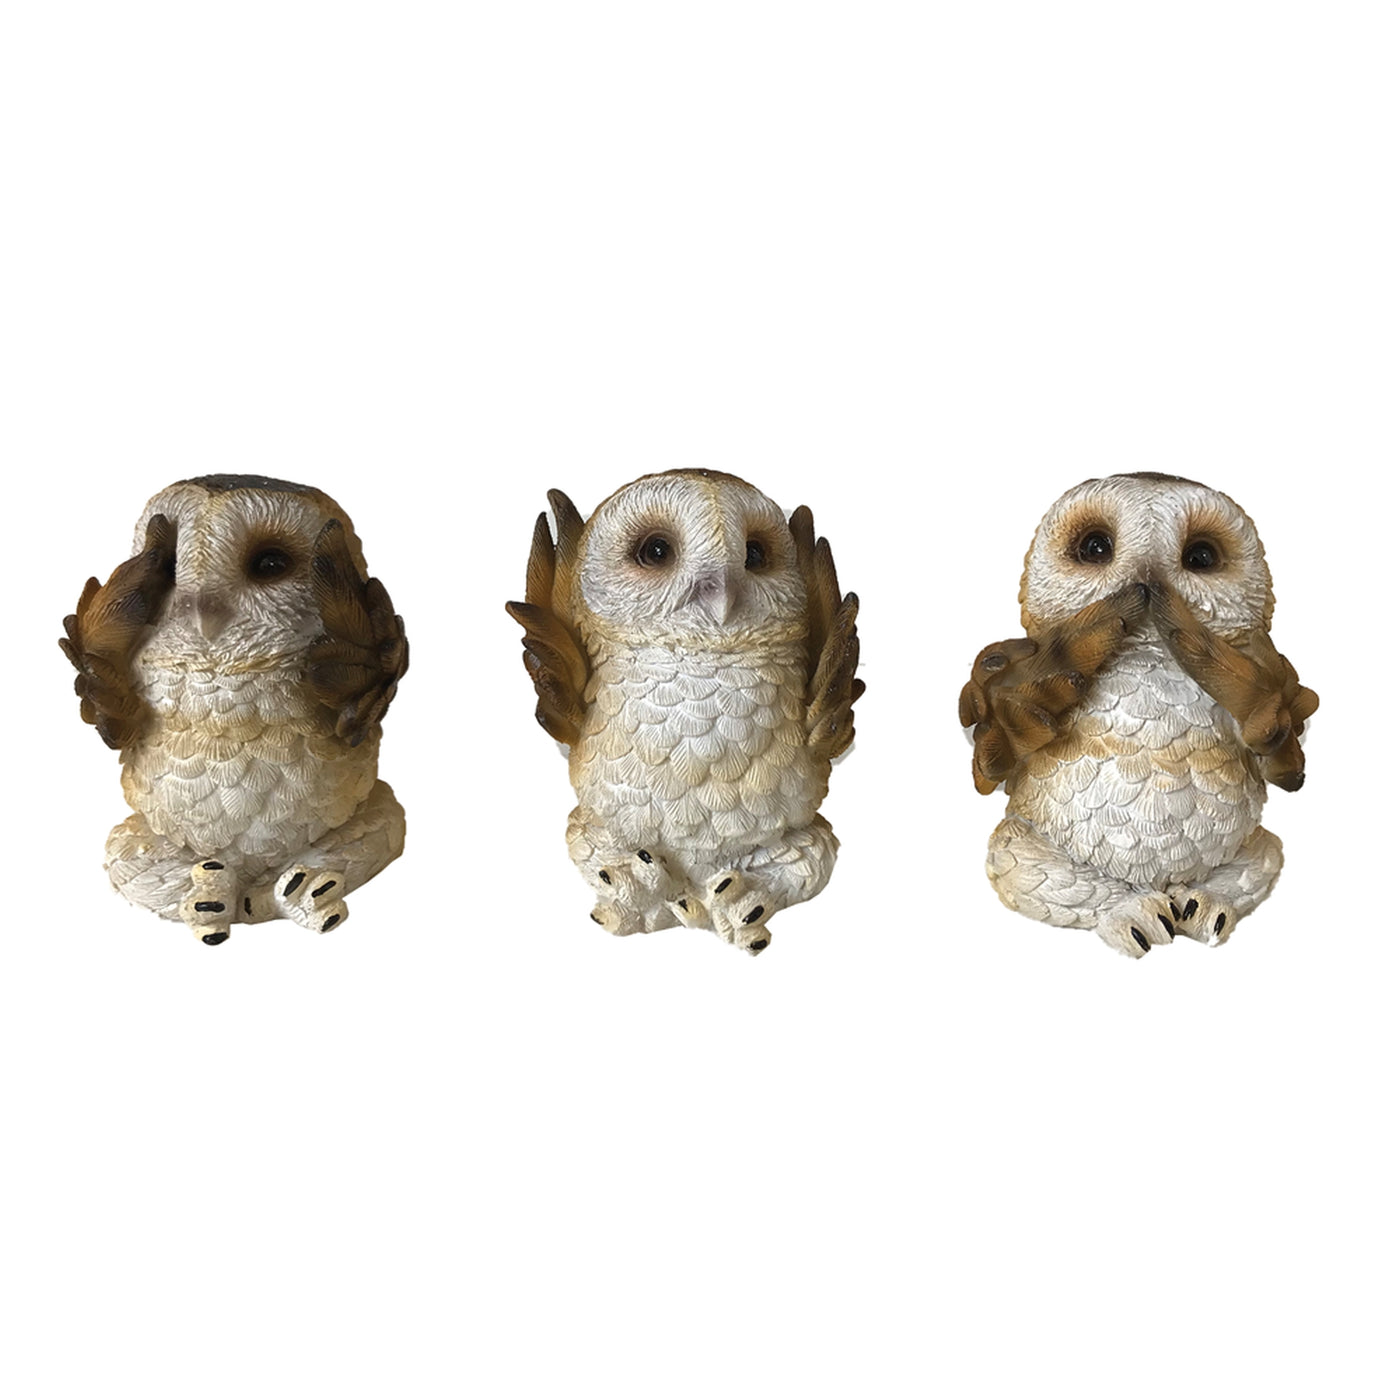 Three Wise Brown Owls 7.5cm Ornament